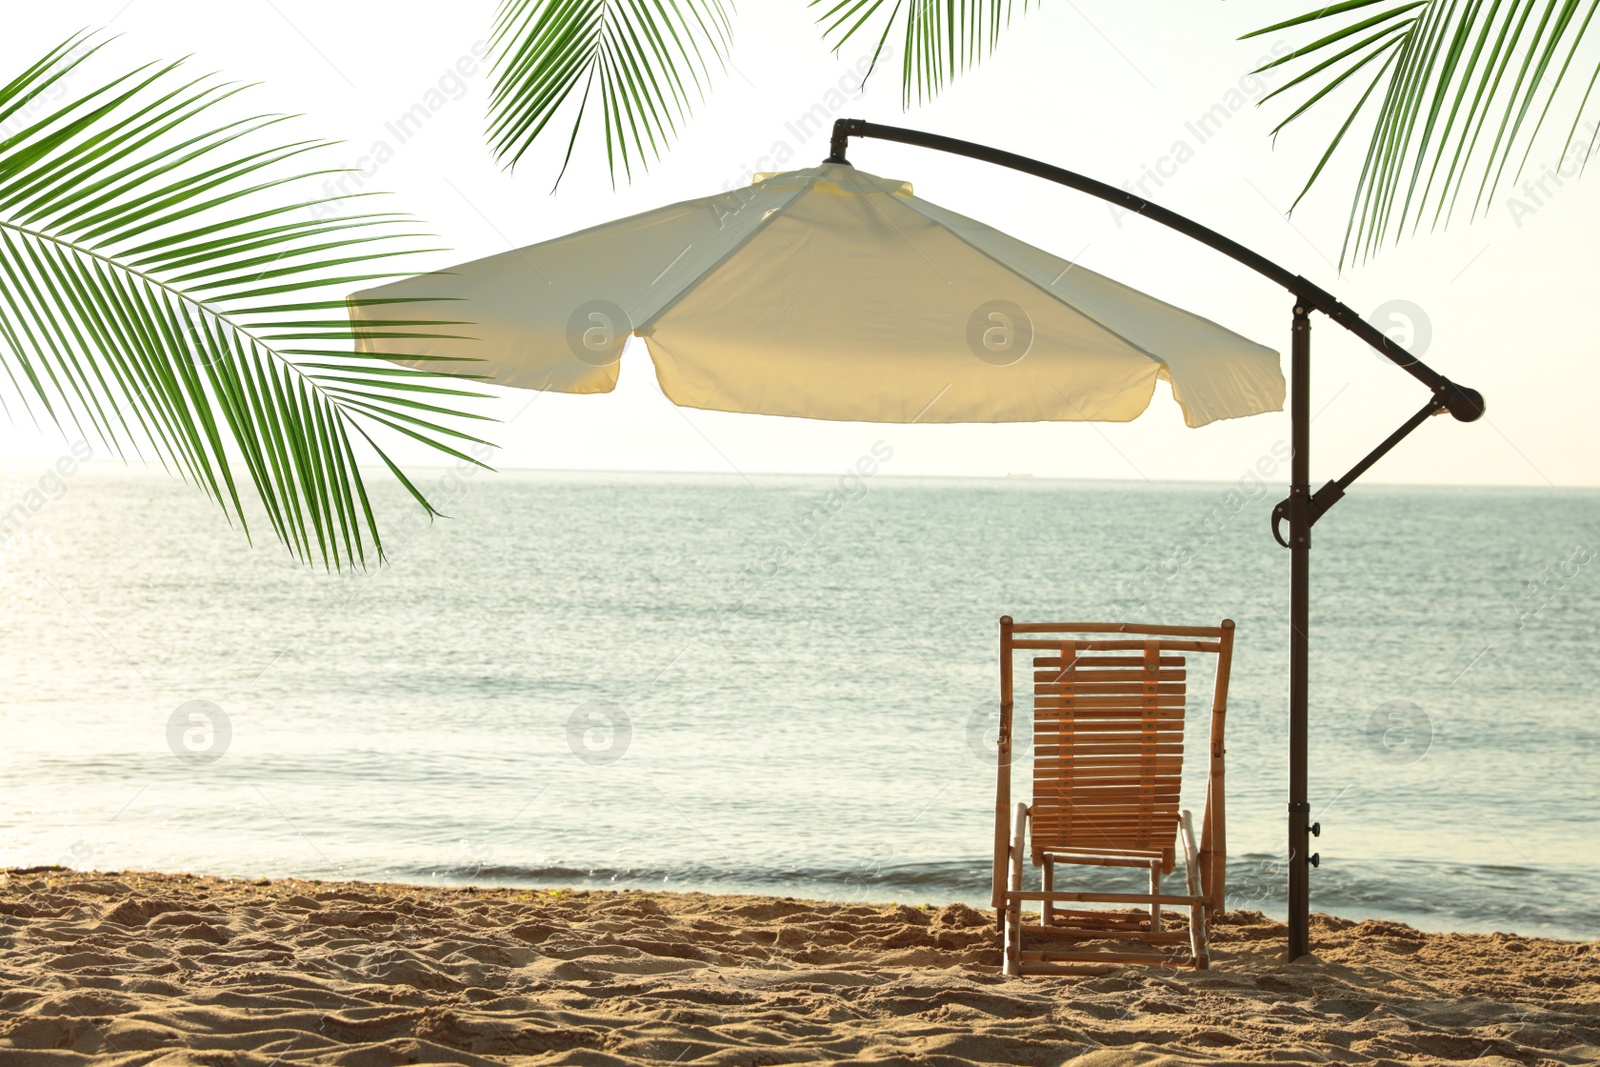 Image of Wooden sun lounger and outdoor umbrella on sandy beach. Summer vacation